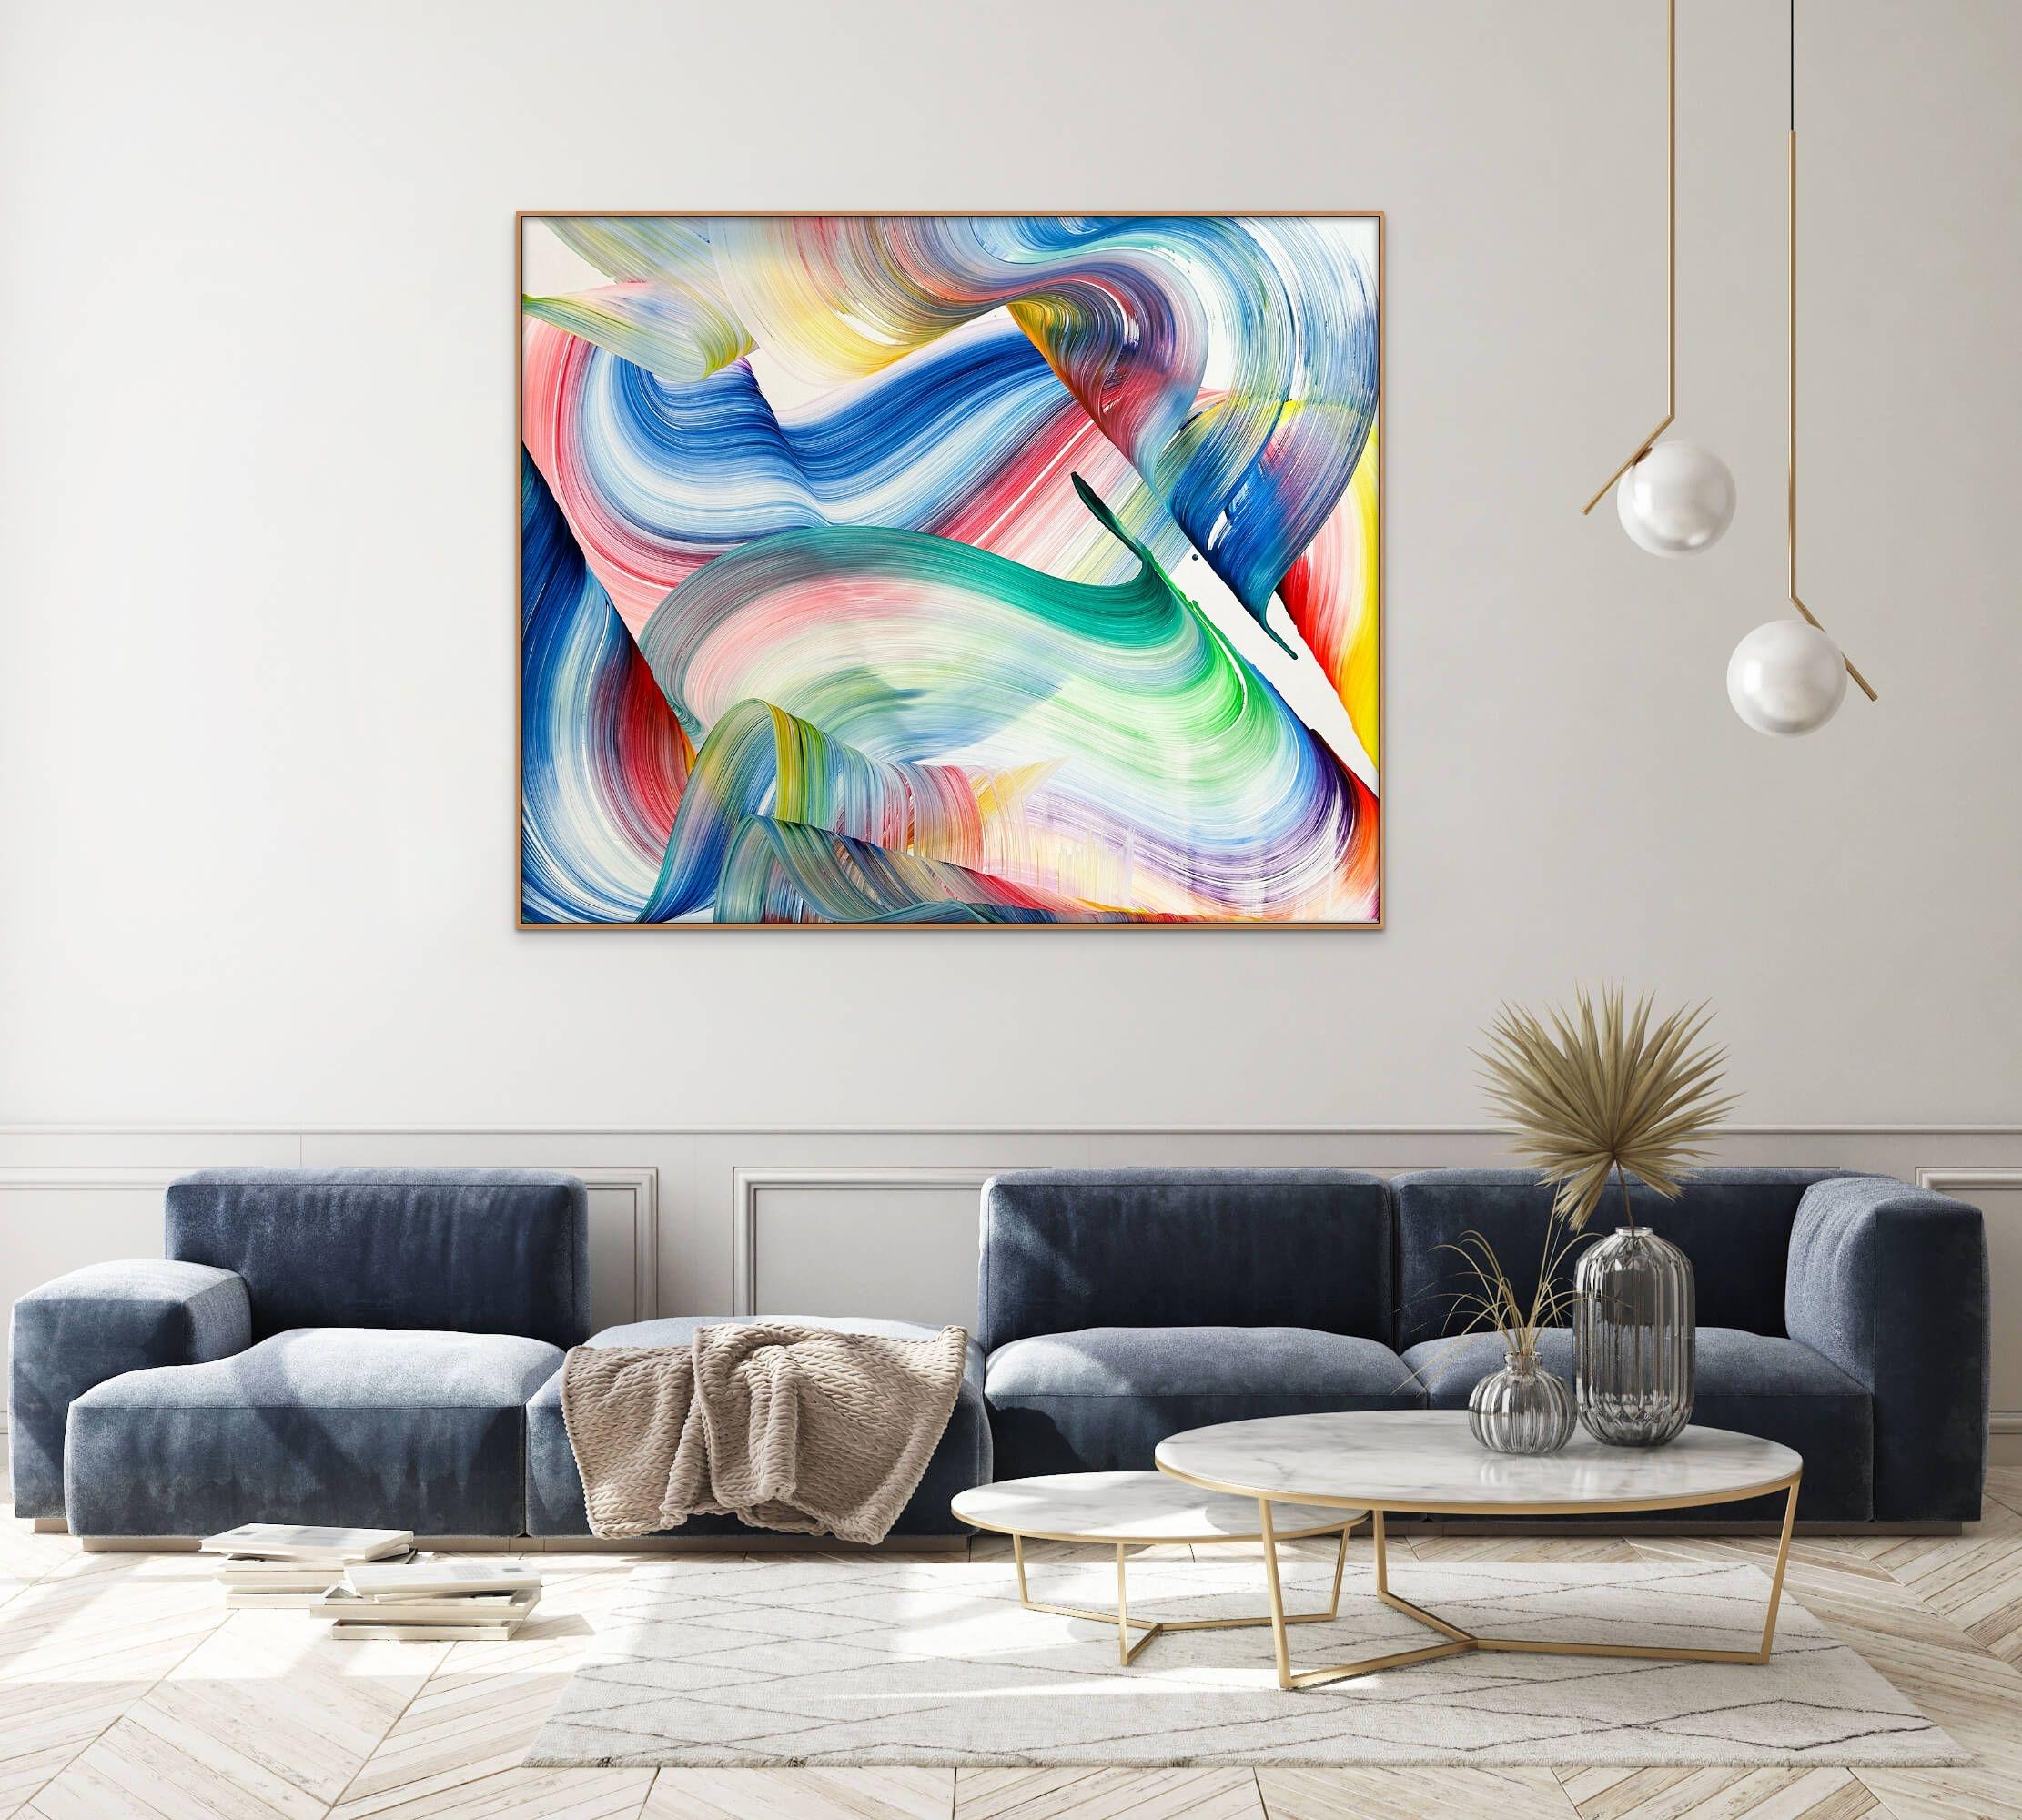 Aires tropicales (Abstract painting)
Acrylic on canvas — Unframed

This artwork will be shipped rolled in a dent-resistant tube.
This method is especially safe for large works, and provides lower shipping costs as well.
Rolled works can be easily